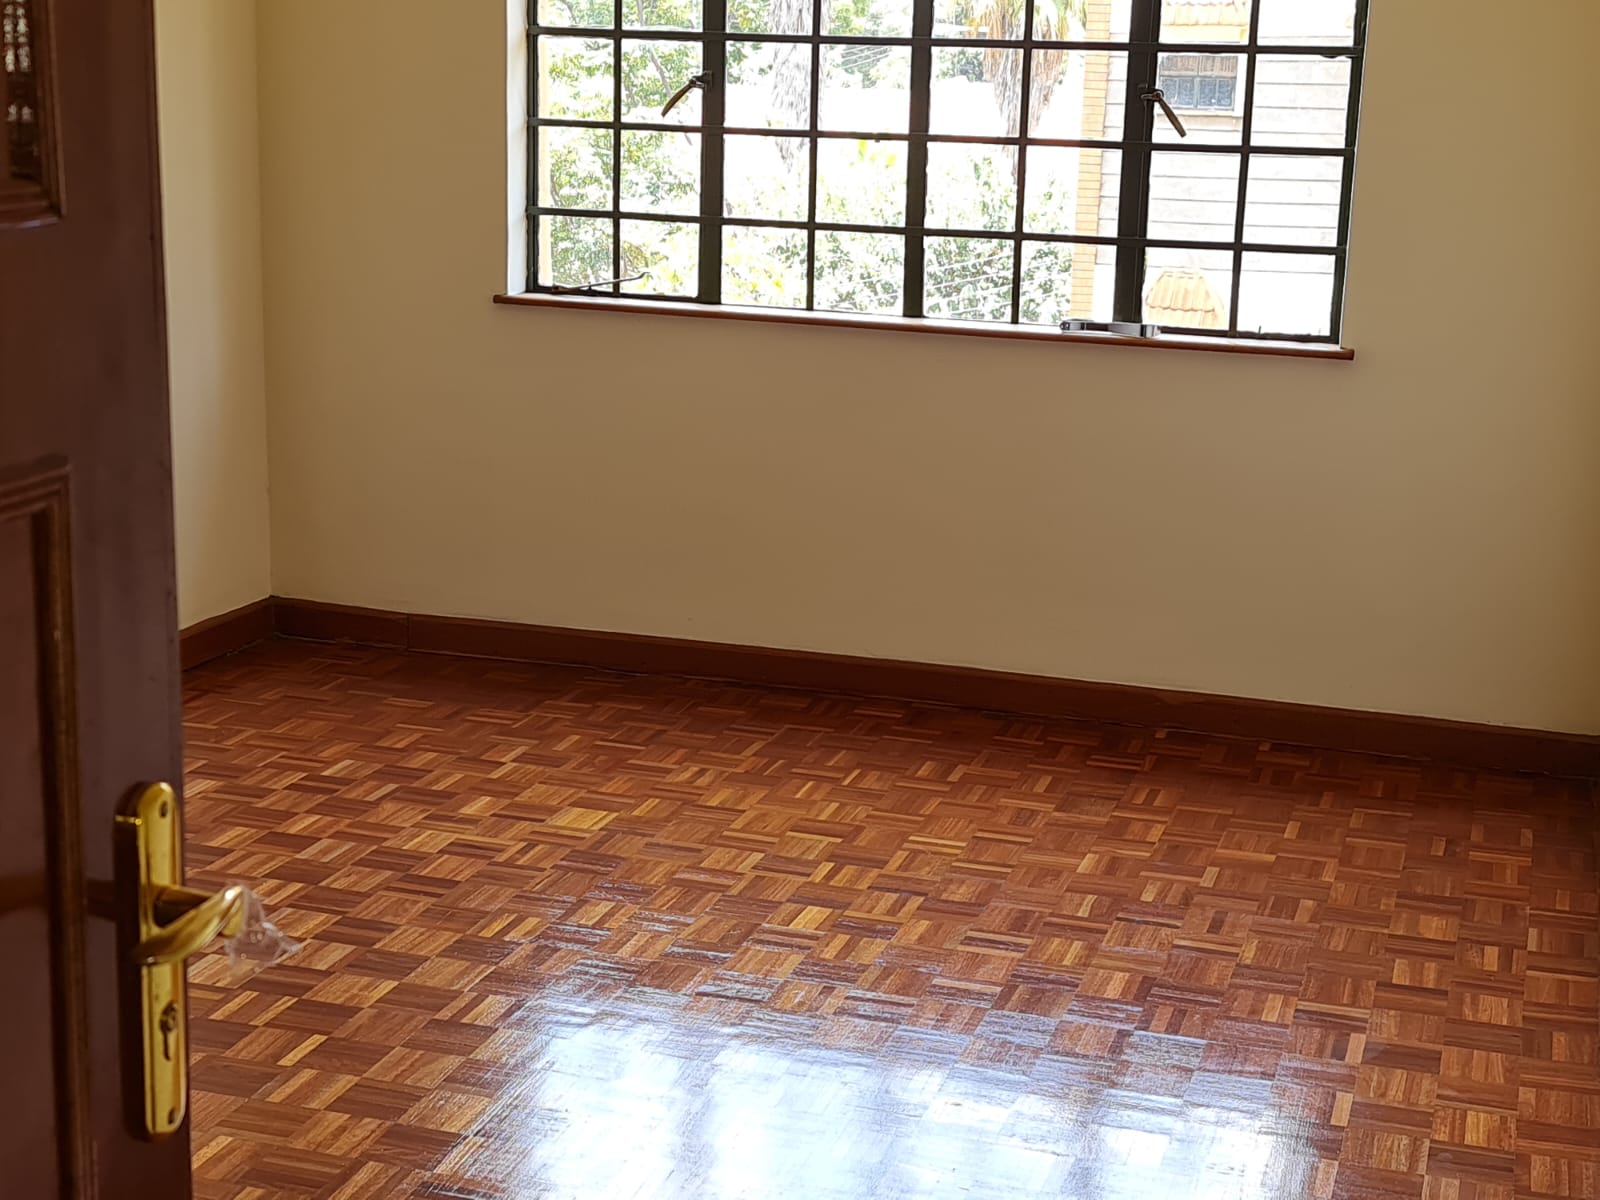 Newly Renovated Spacious 4 Bedroom Apartment for Rent at Ksh95k in Westlands, Raphta Road (7)